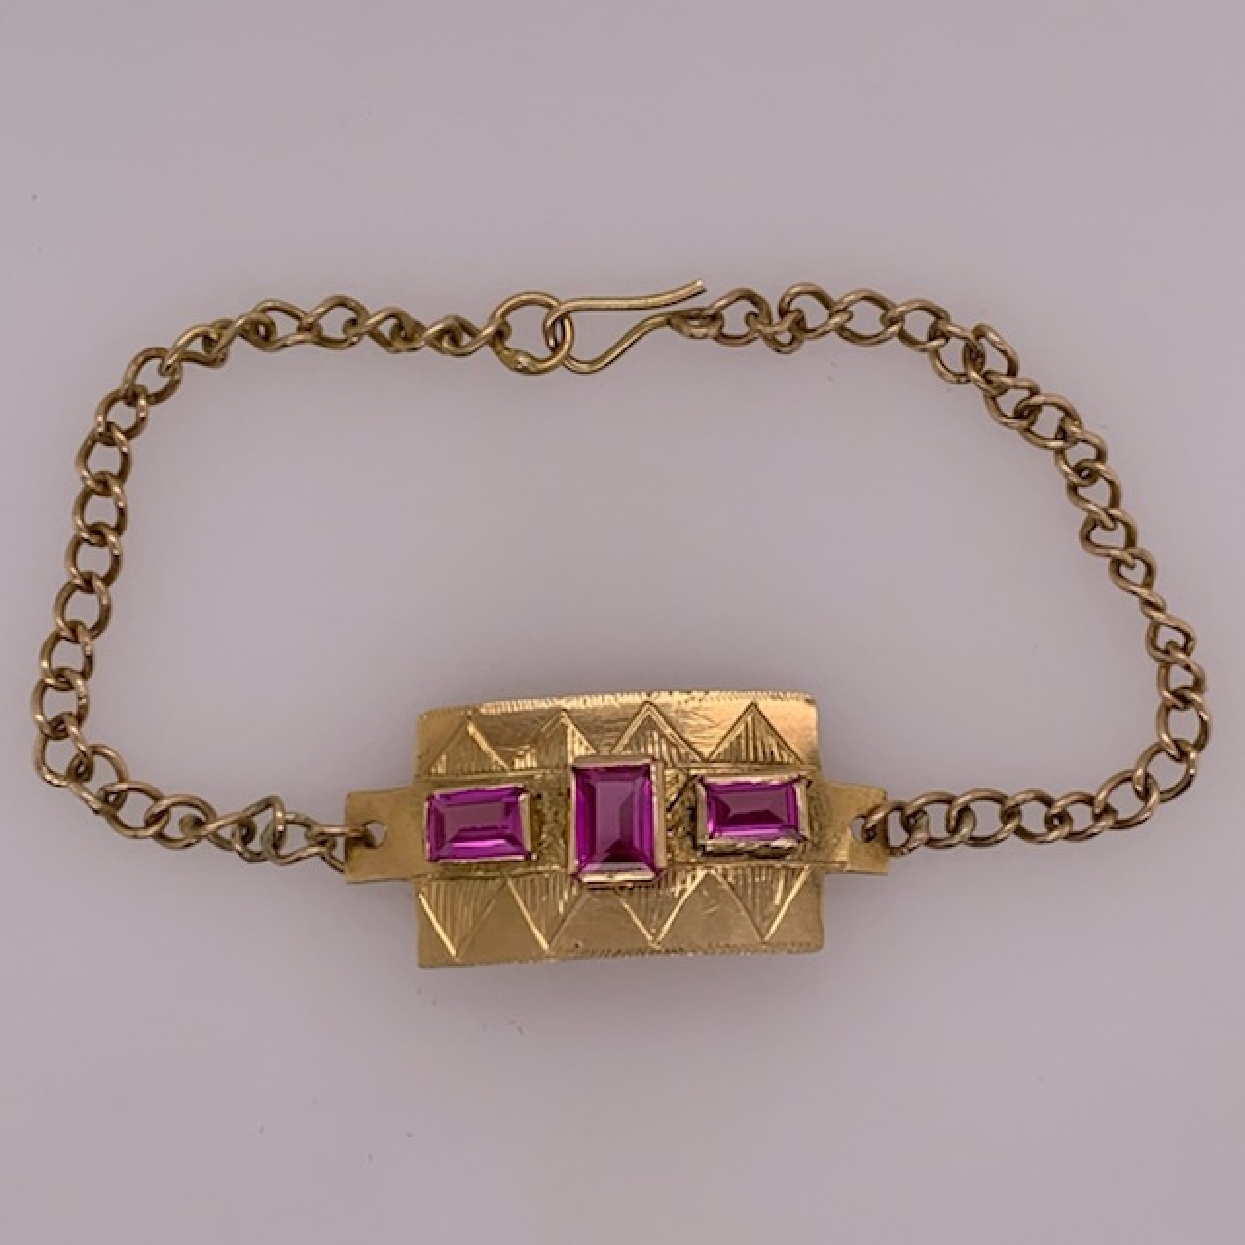 Vintage 14K Yellow Gold Chain Link Bracelet with Etched Plate with Bezel Set Synthetic Rubies; 7 inches